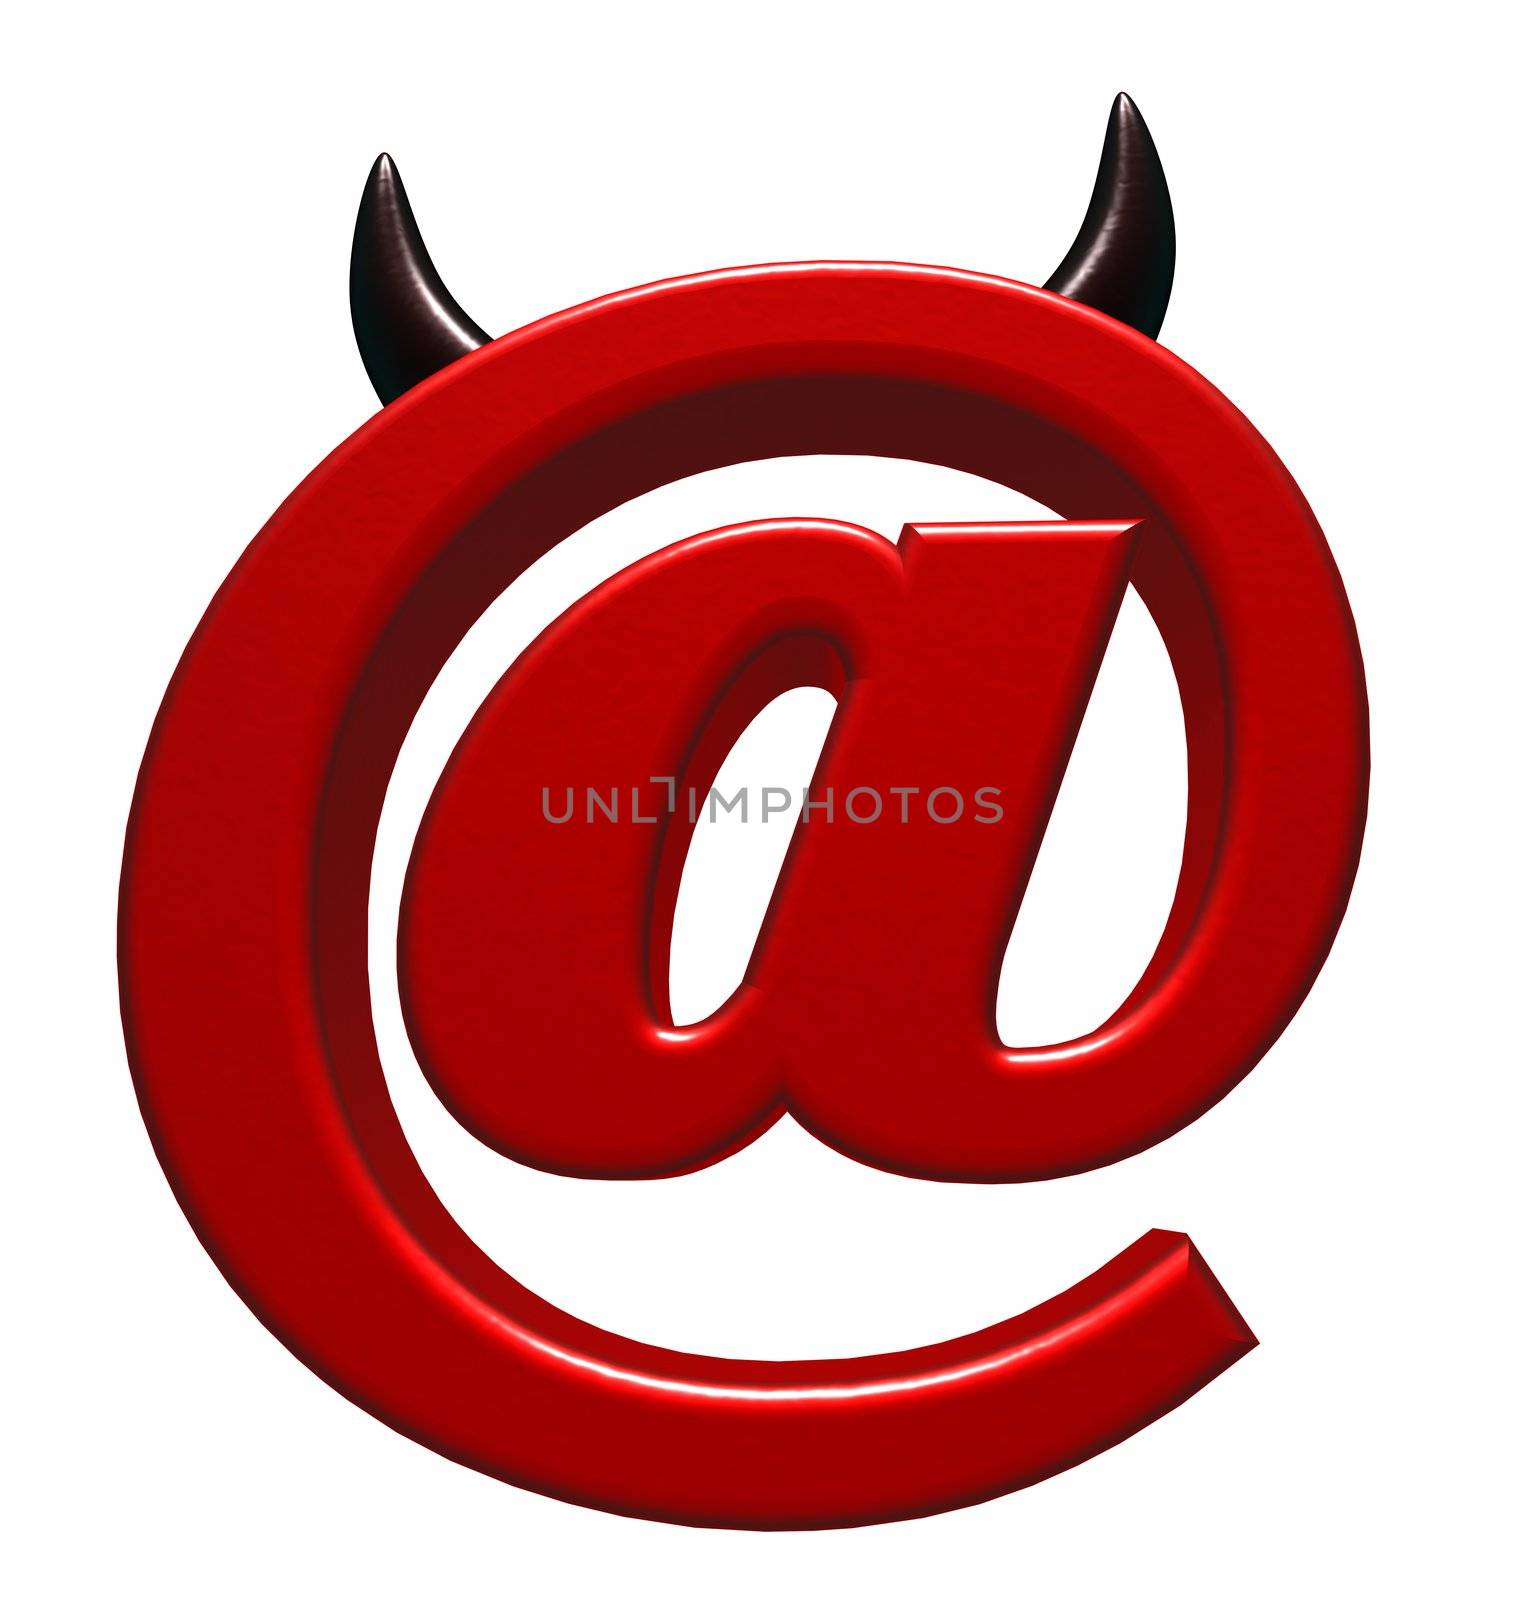 email symbol with horns on white background - 3d illustration